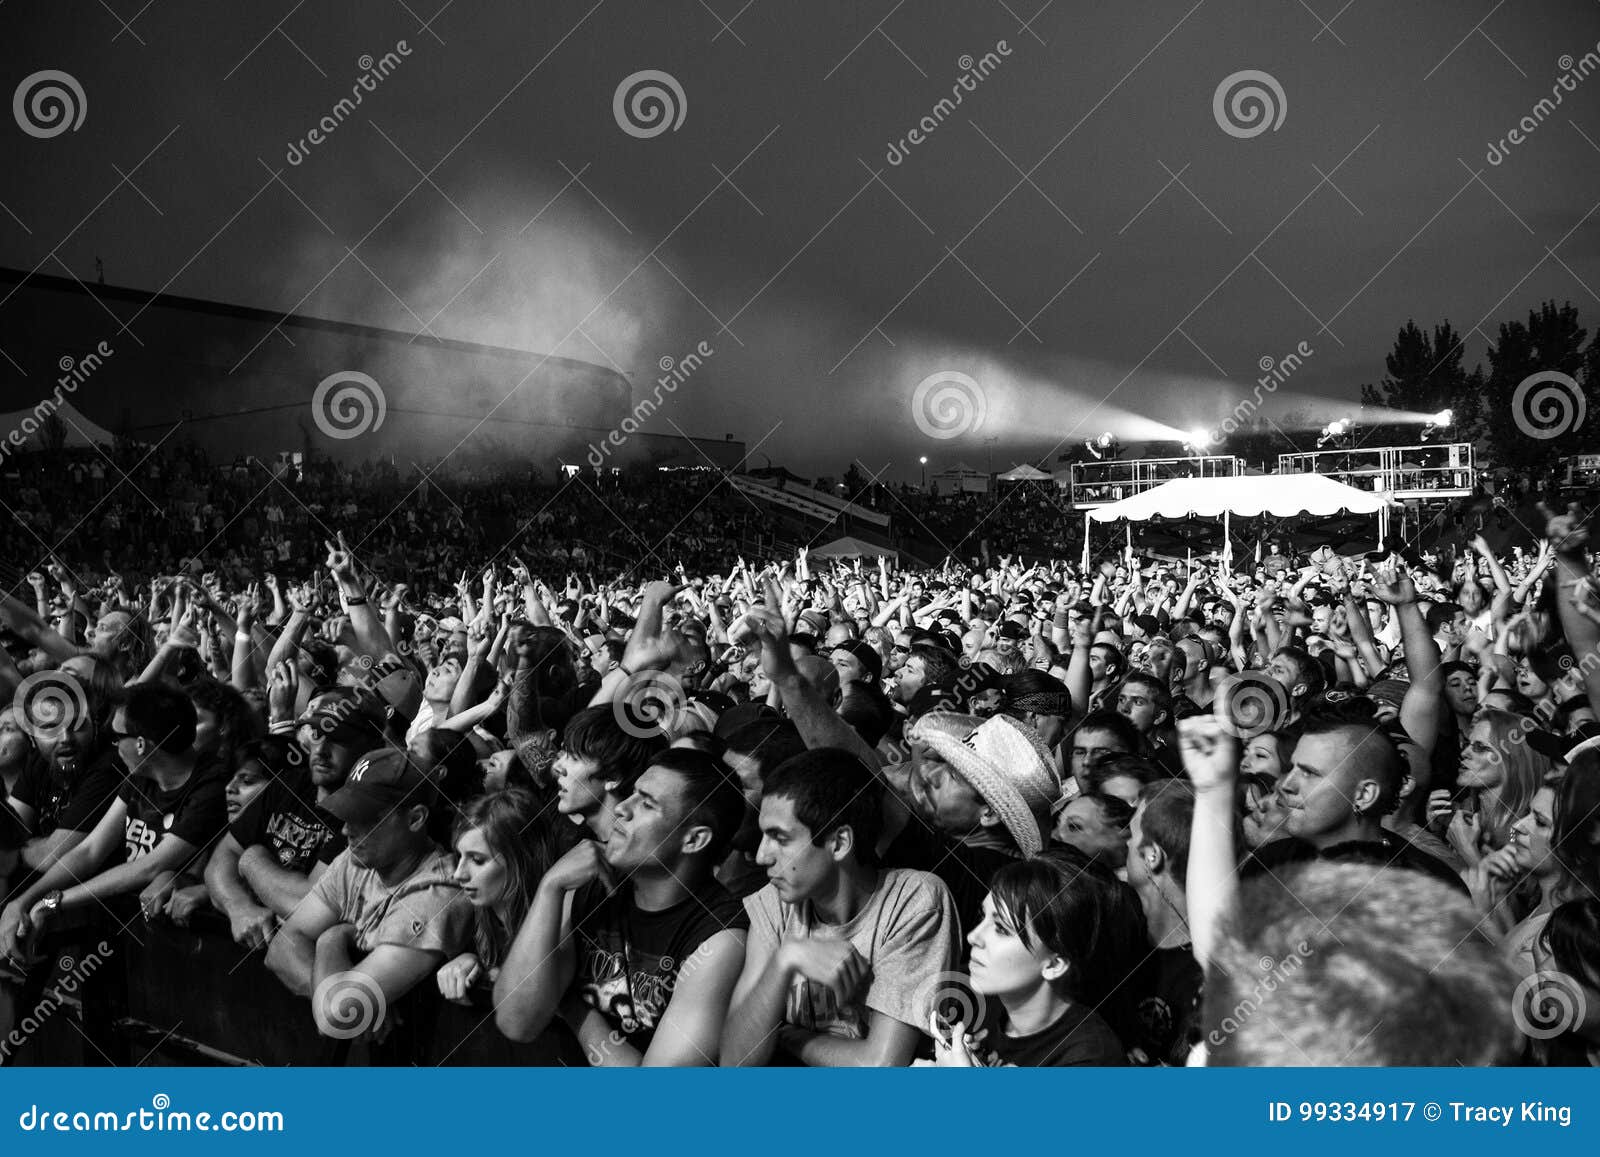 Photo about NAMPA, IDAHO/USA SEPTEMBER 25, 2012: Crowd of fans wait for the...